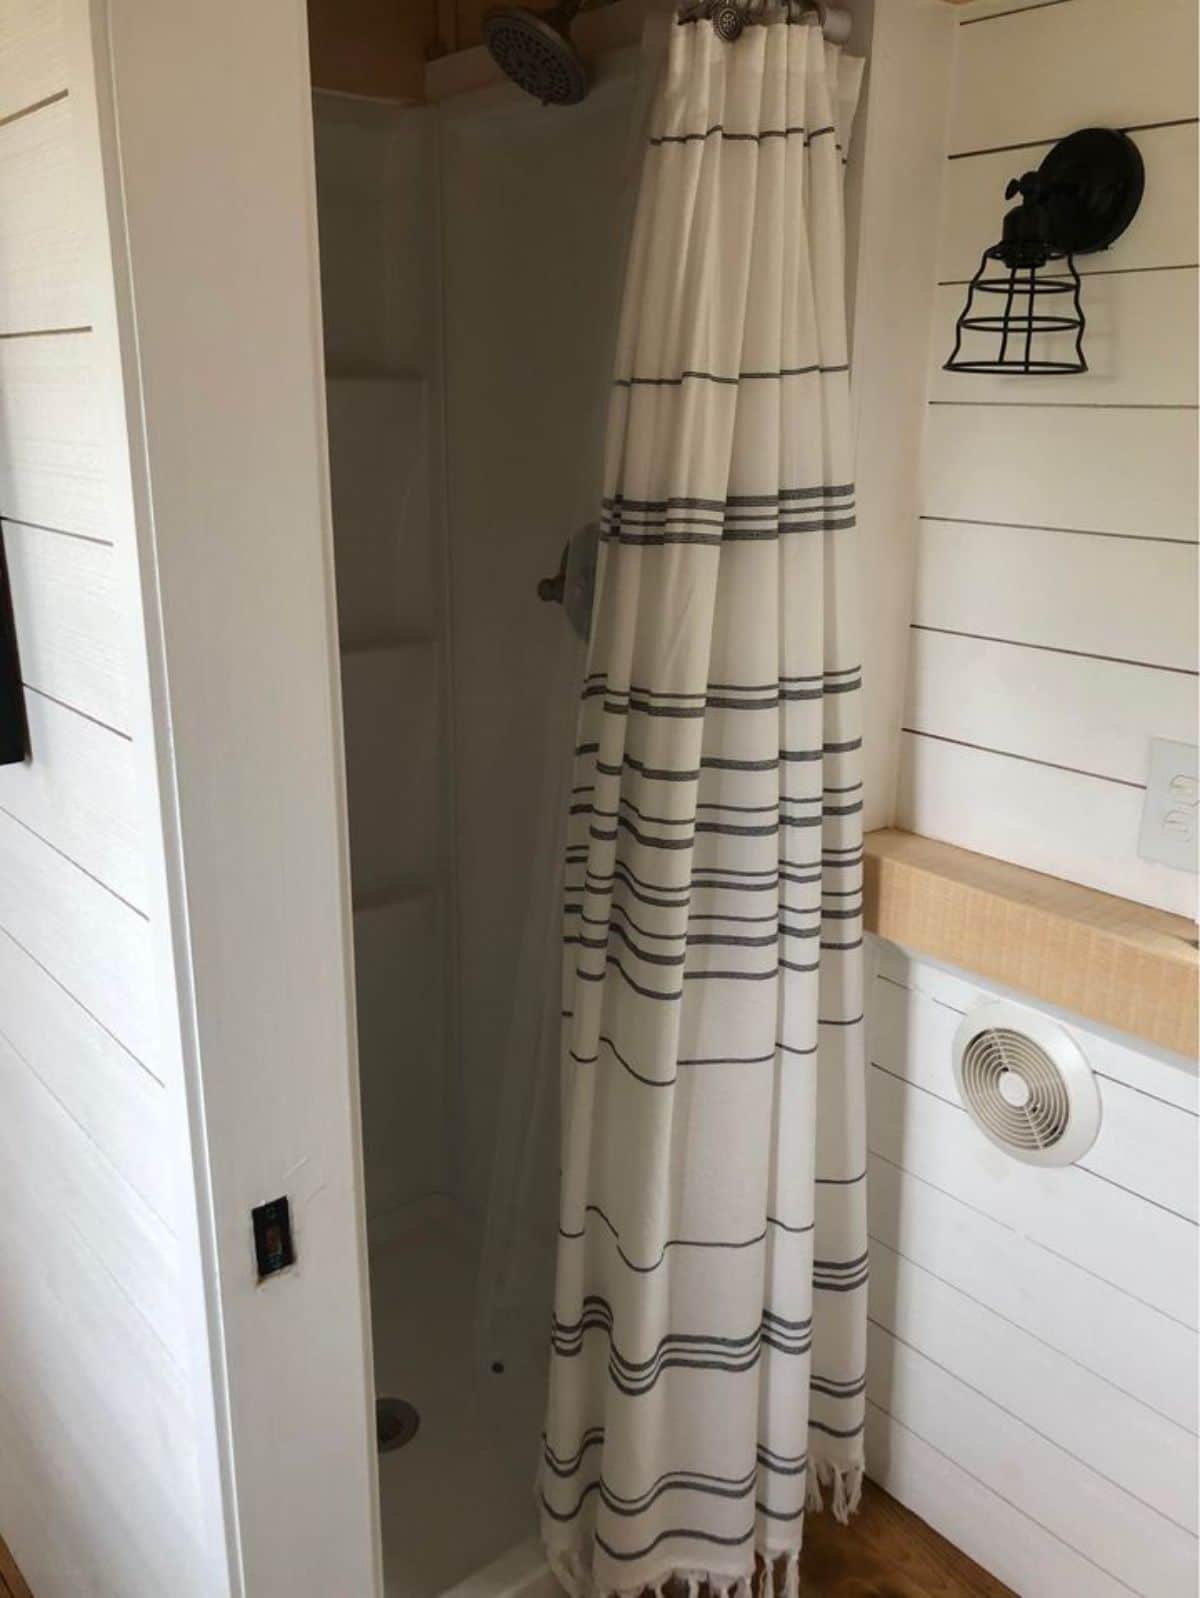 Shower area in bathroom of 26’ Timber Framed Tiny House